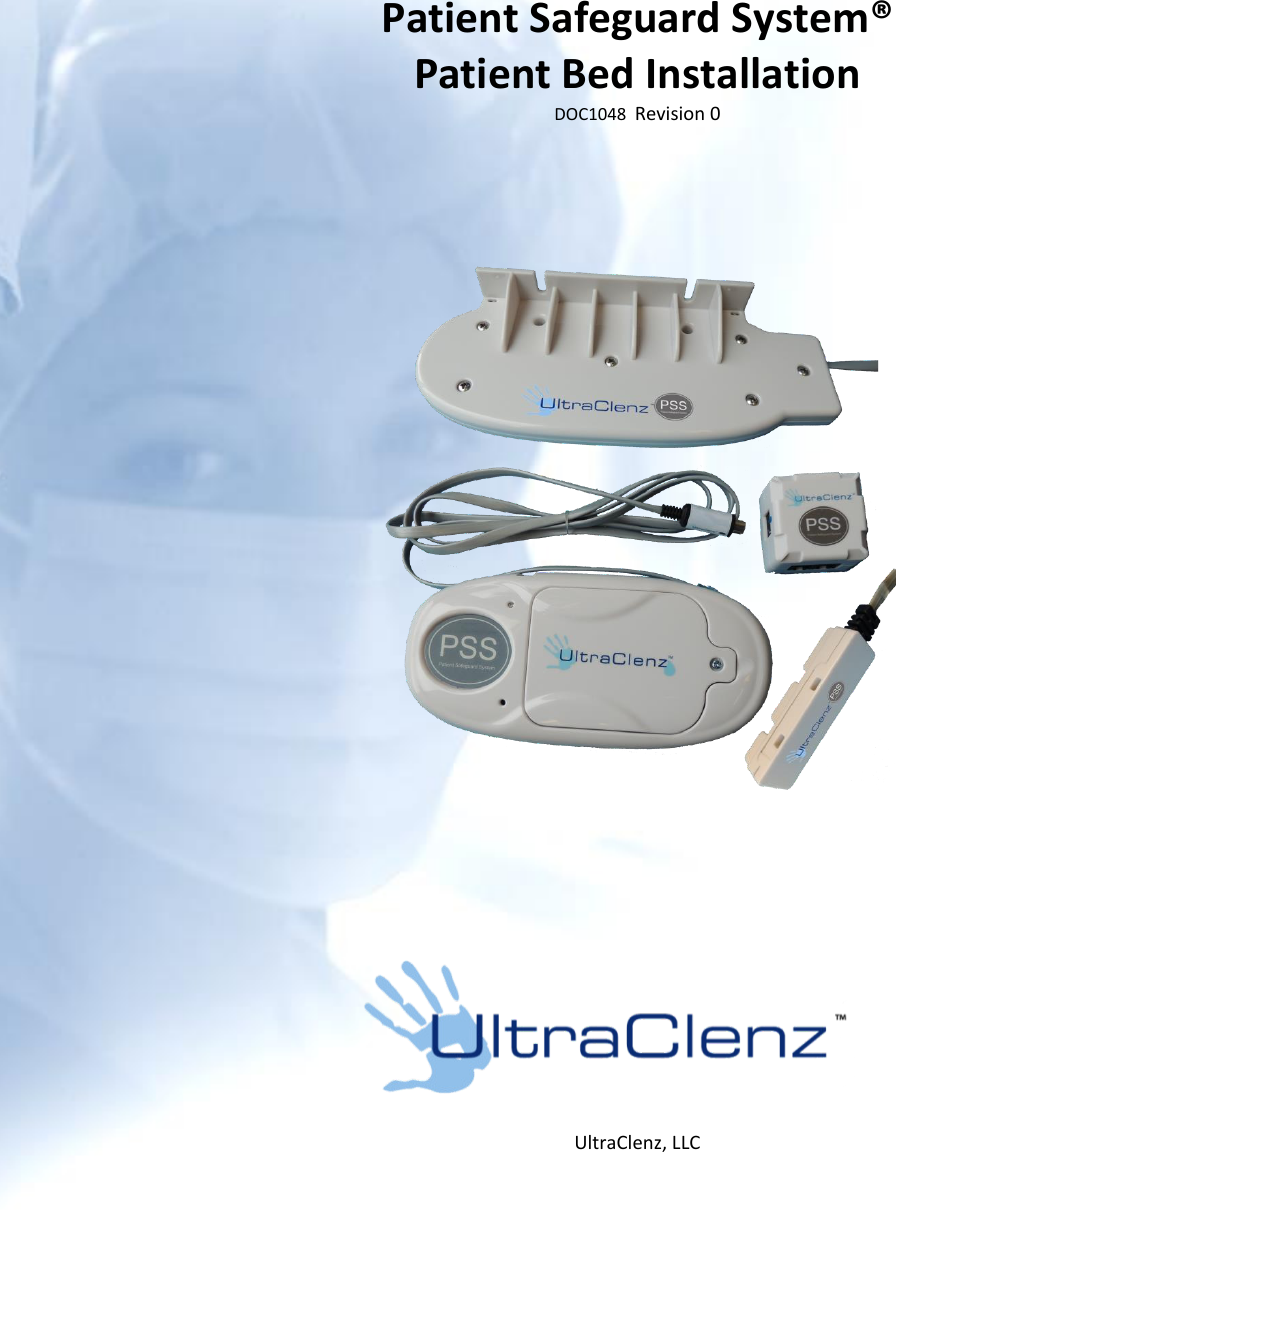      Patient Safeguard System® Patient Bed Installation DOC1048  Revision 0               UltraClenz, LLC  